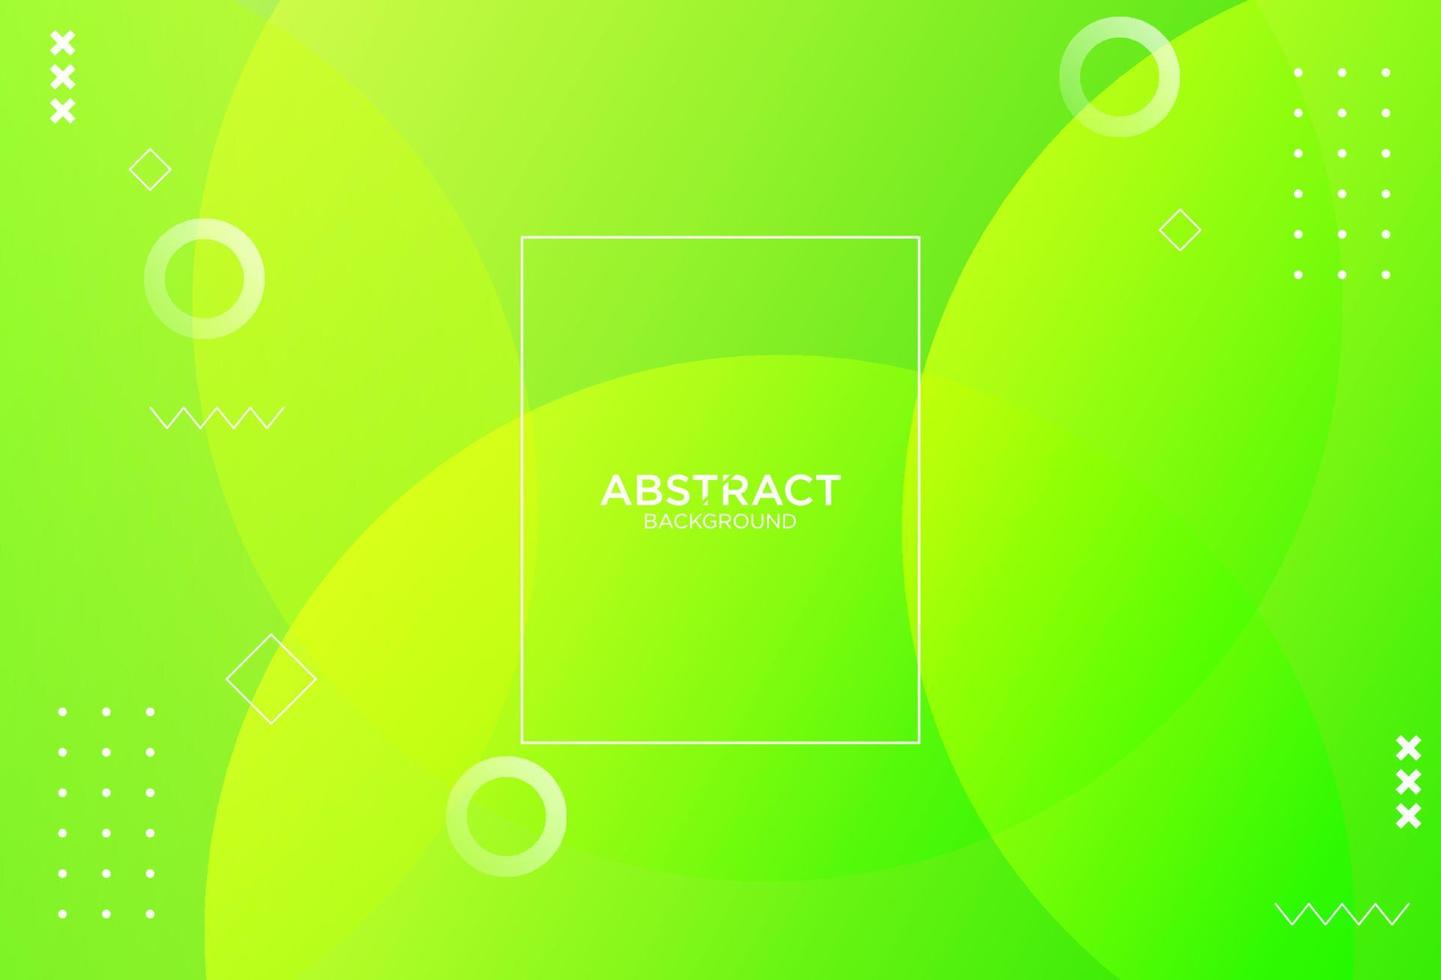 modern background, composition of trendy gradient shapes, liquid effect, abstract illustration. perfect design for your business. dynamic shape composition. vector